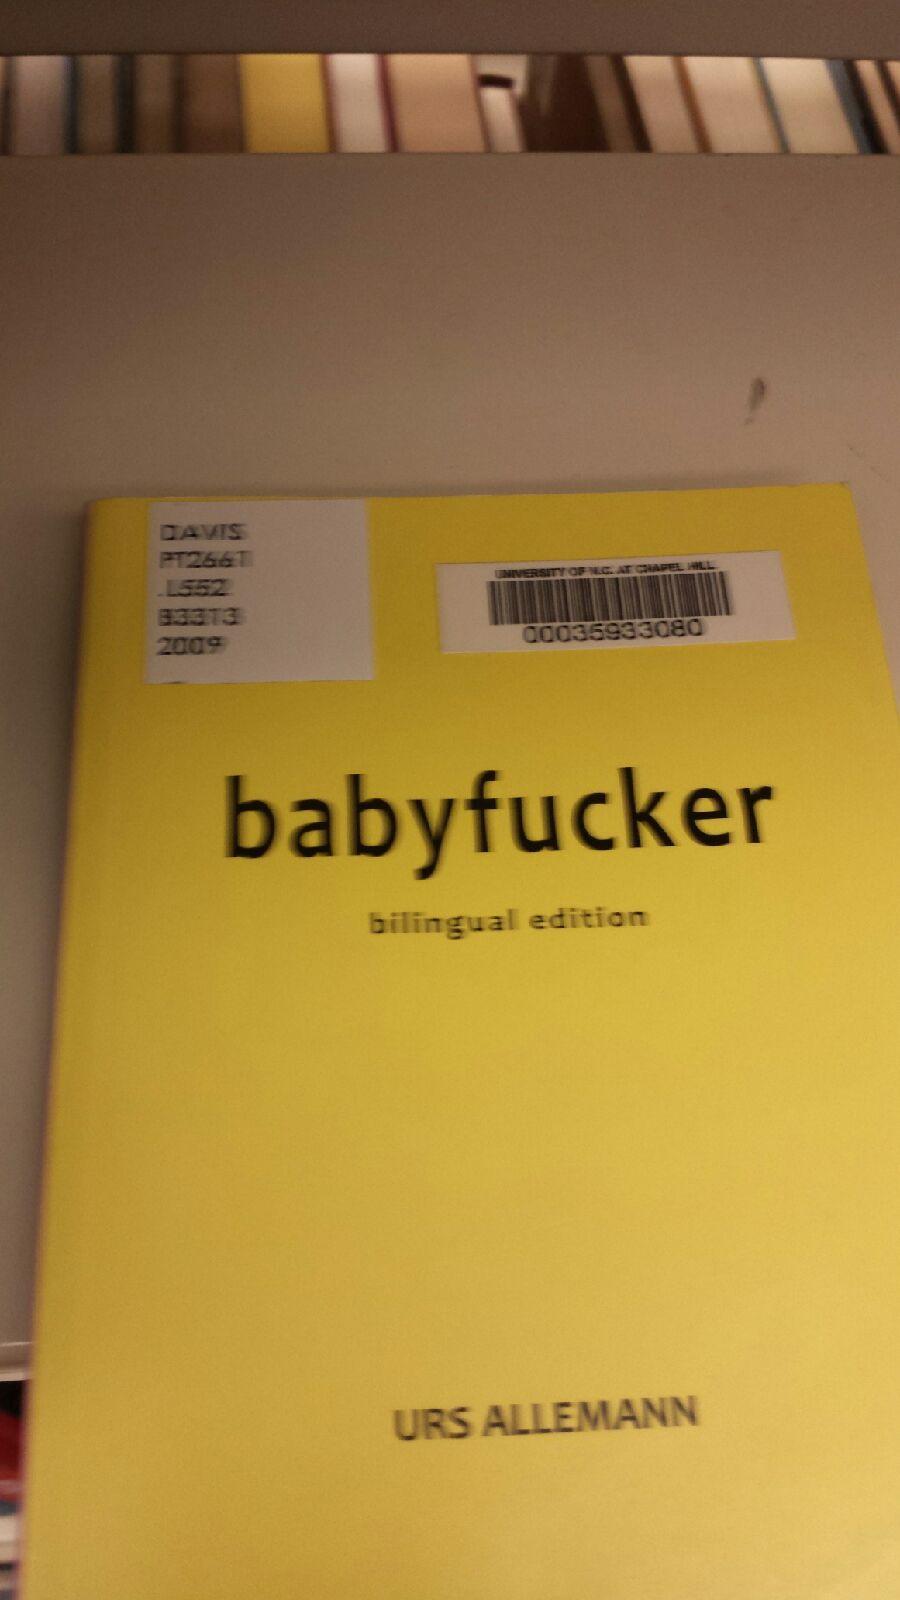 Friend works at a library. He had to shelve this book today